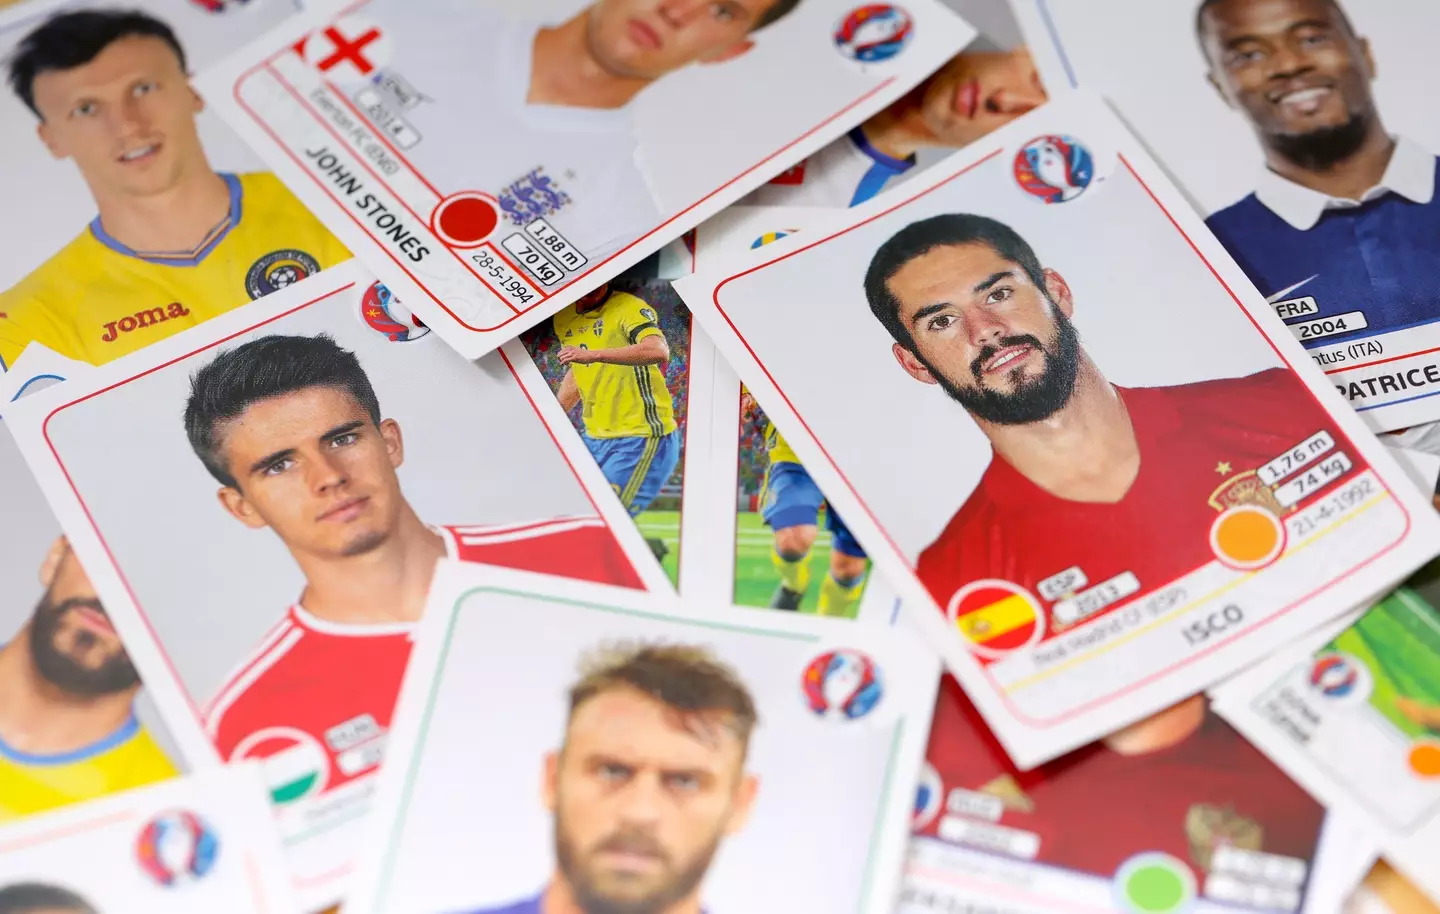 Panini will no longer make stickers for the Euros after this summer. Image: PA Images